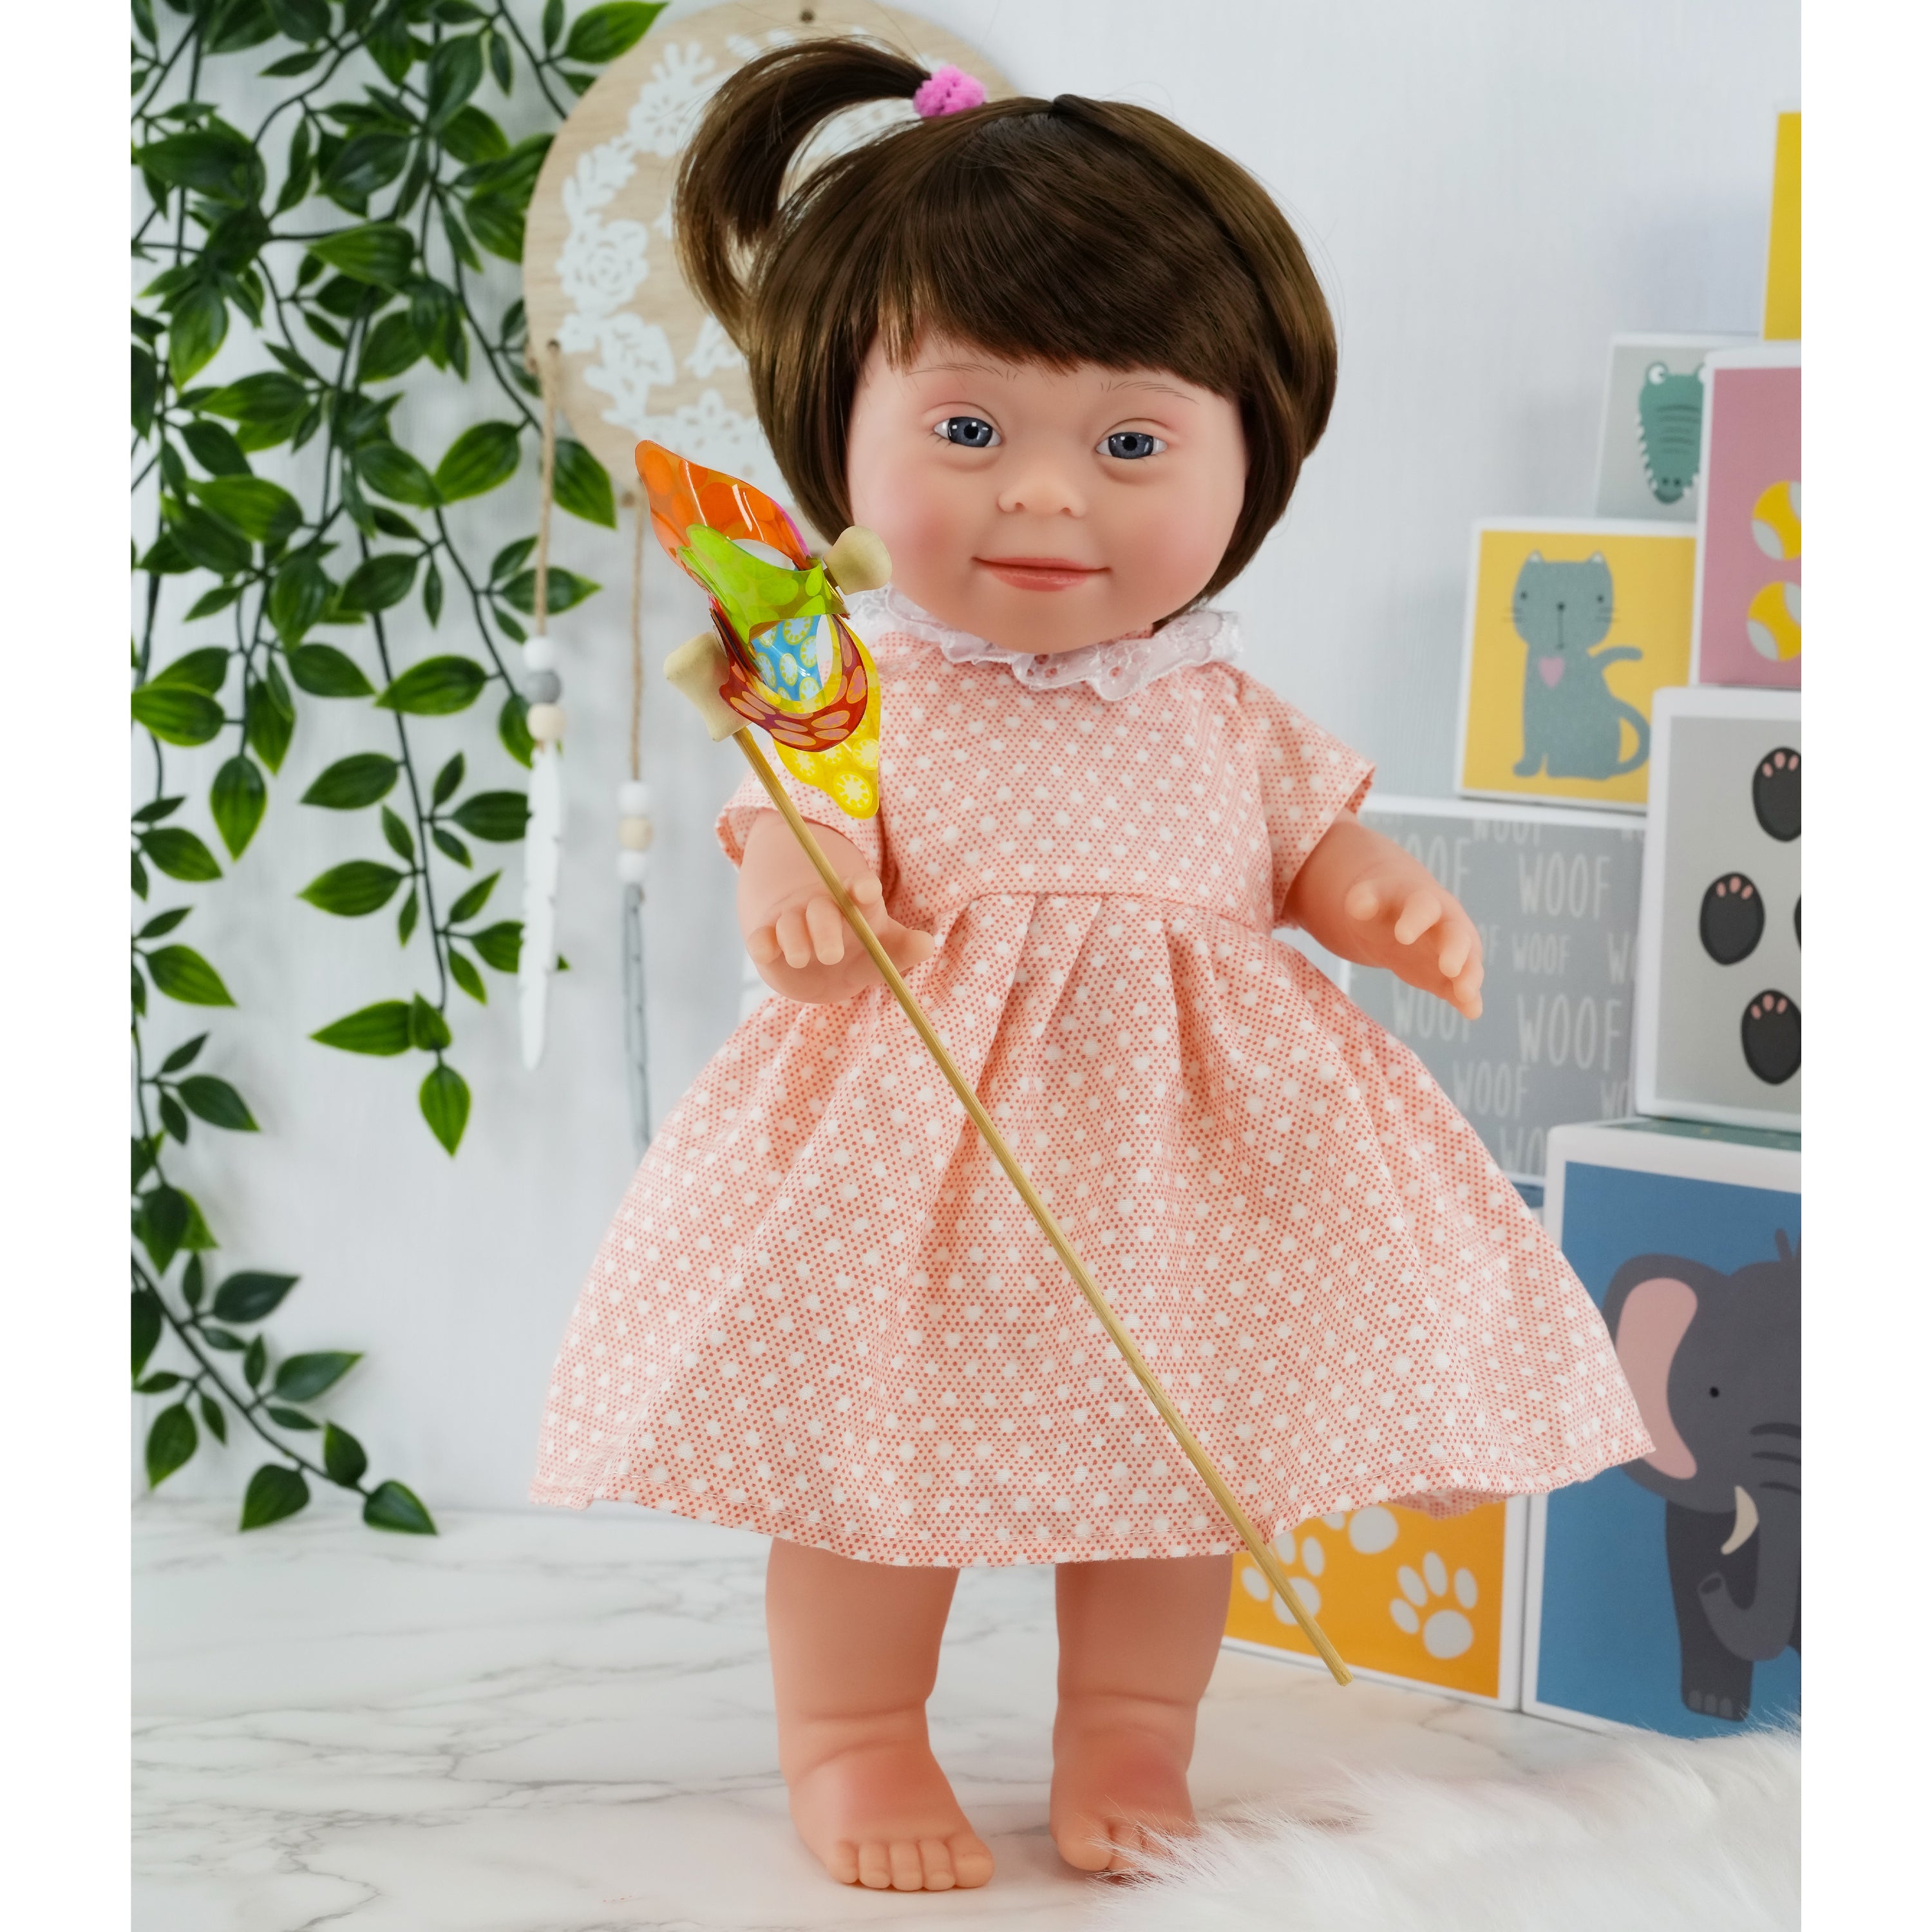 Brown Hair Girl Baby Doll with Down Syndrome BiBi Doll - The Magic Toy Shop